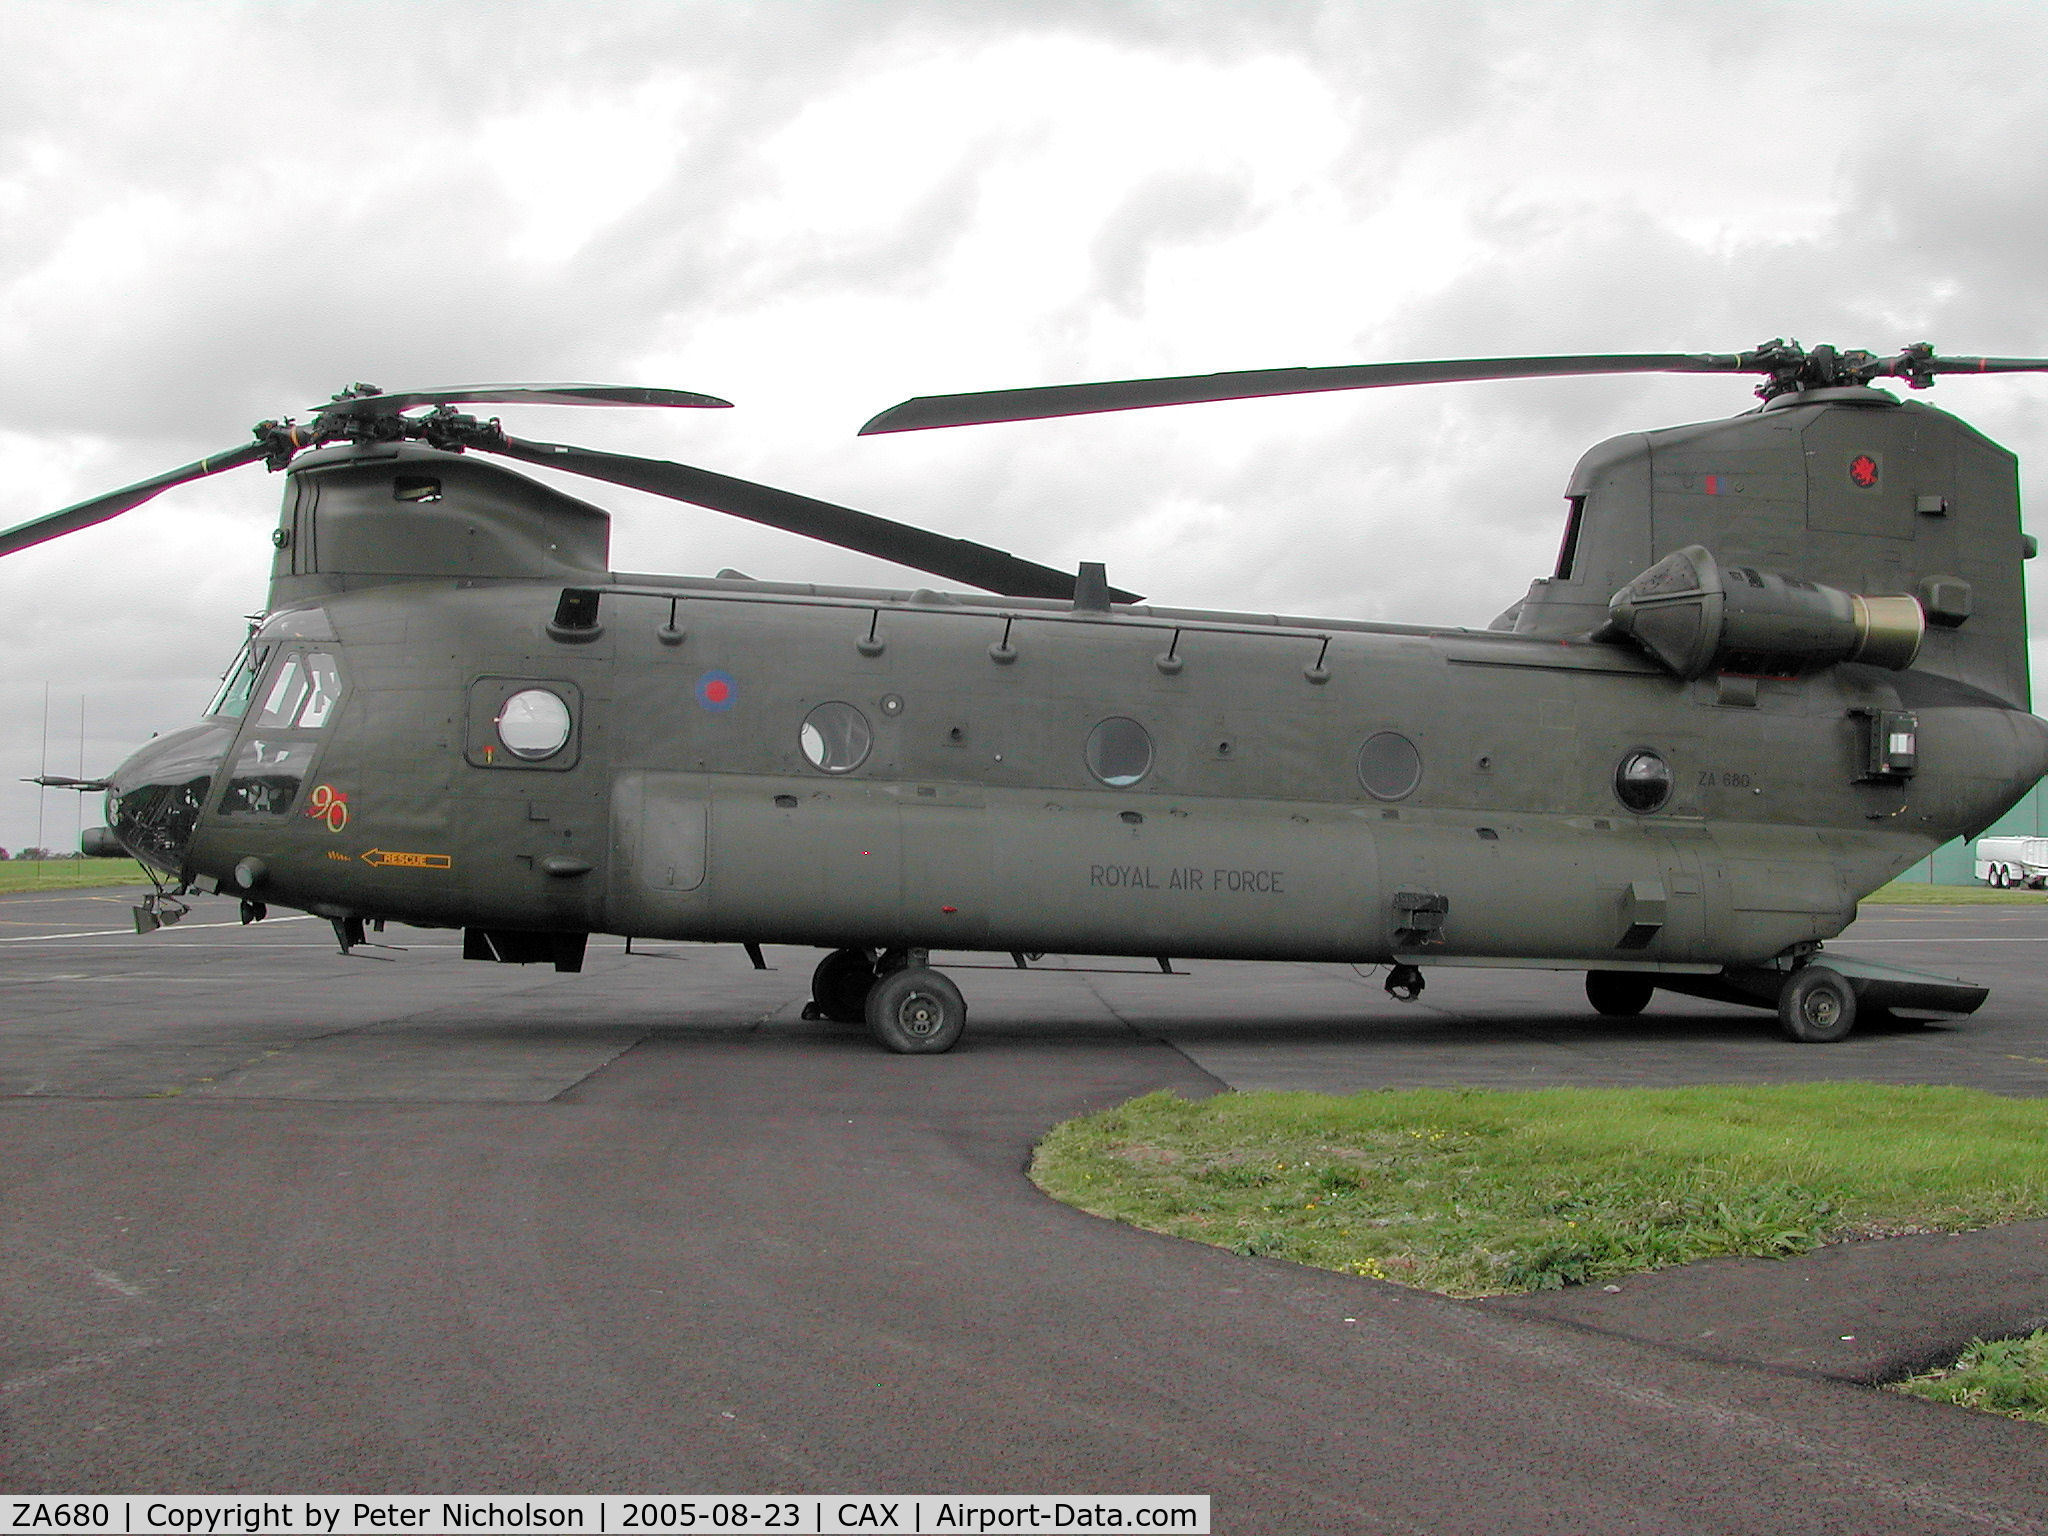 ZA680, Boeing Vertol Chinook HC.2 C/N M/A011/B-828/M7024, Chinook HC.2, callsign Twister 2, of 18 Squadron on a Qualified Helicopter Tactics Instructor course seen at Carlisle in August 2005.